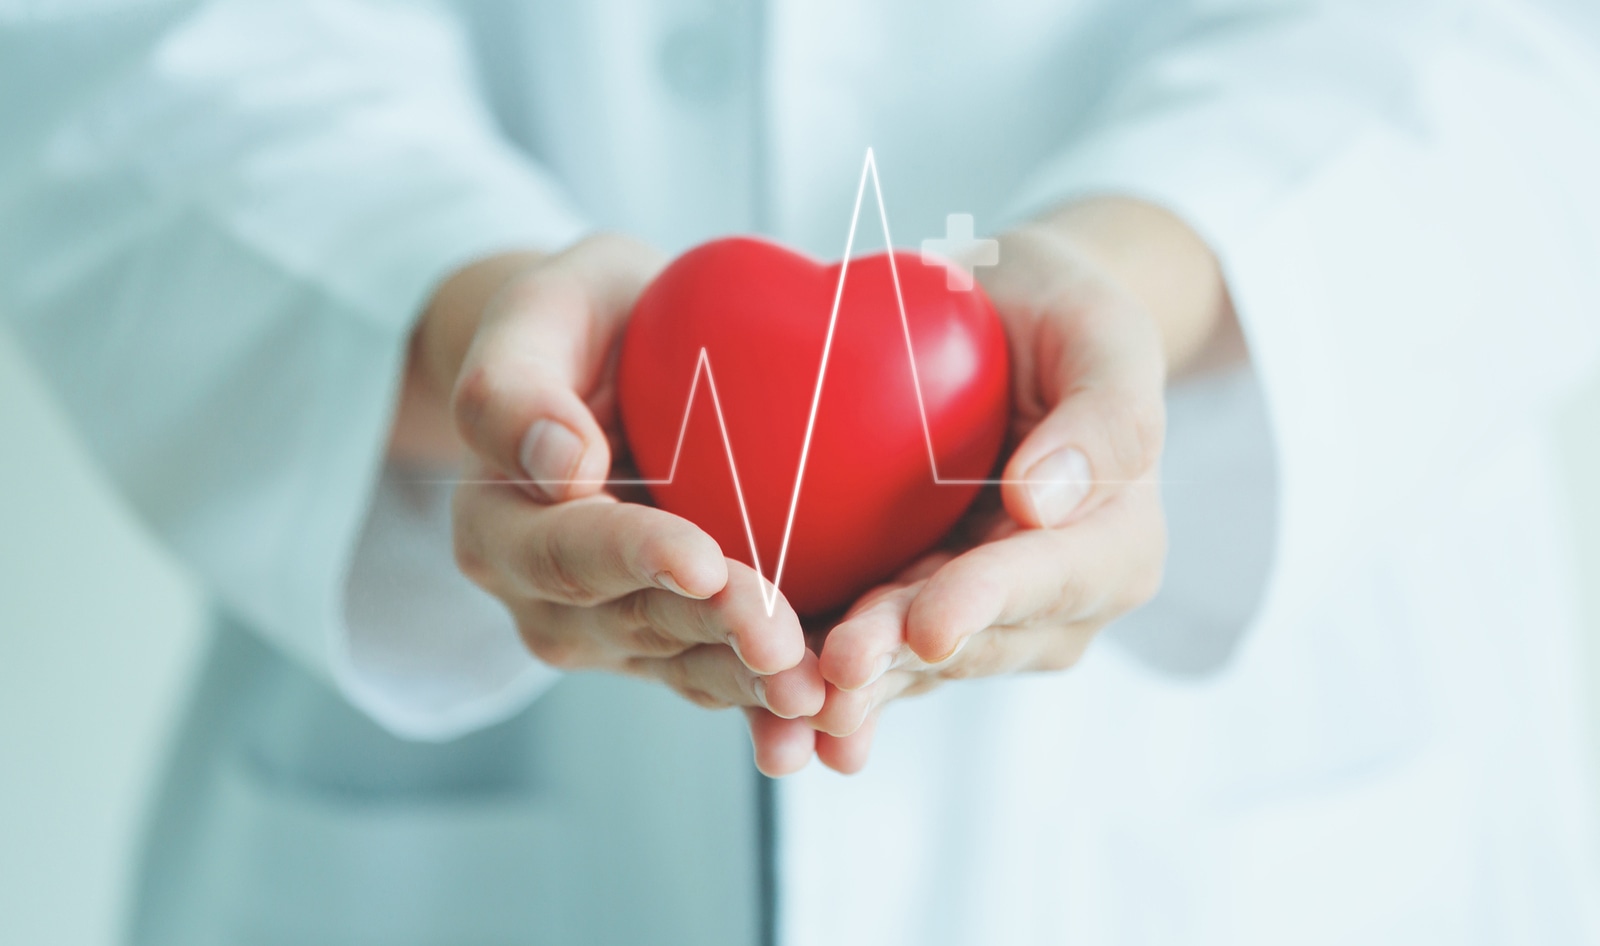 5 Heart Health Tips from Plant-Based Medical Pros